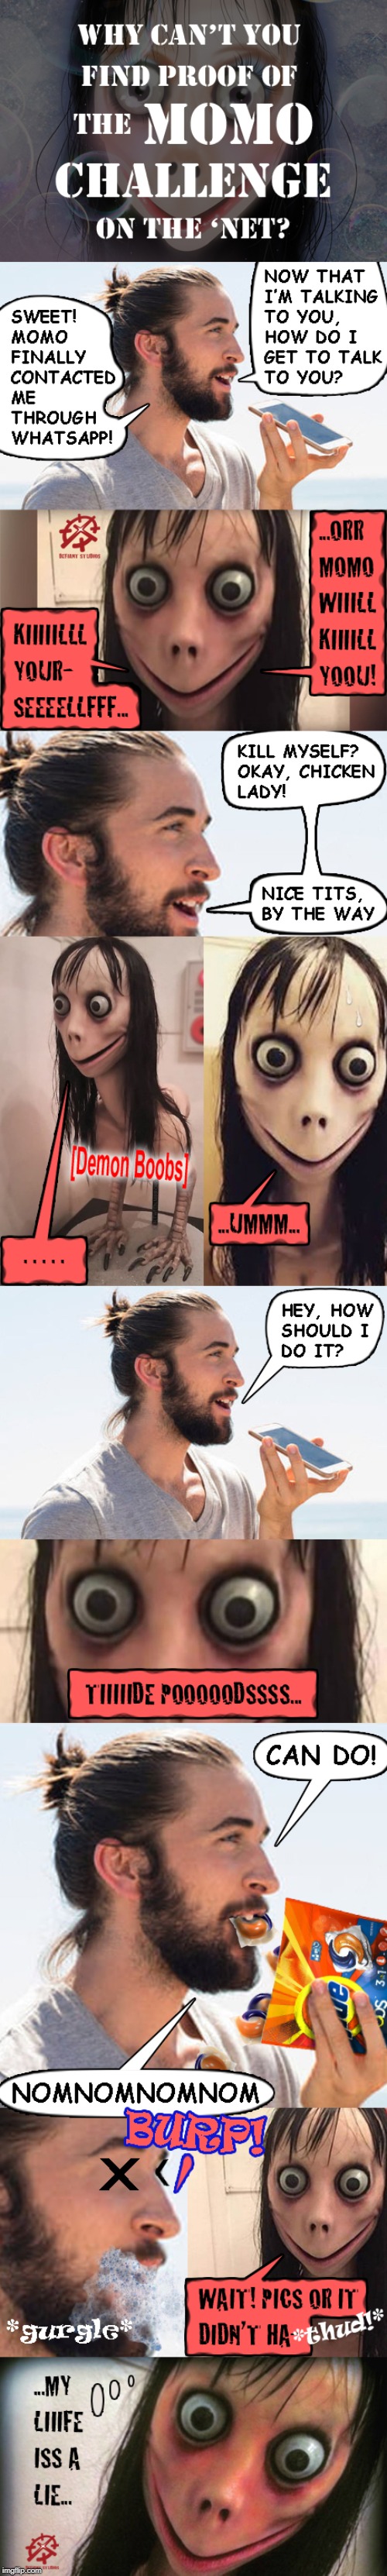 Why Can't You Find Proof of the Momo Challenge on the 'Net? | image tagged in momo,tide pod challenge,challenge,man bun | made w/ Imgflip meme maker